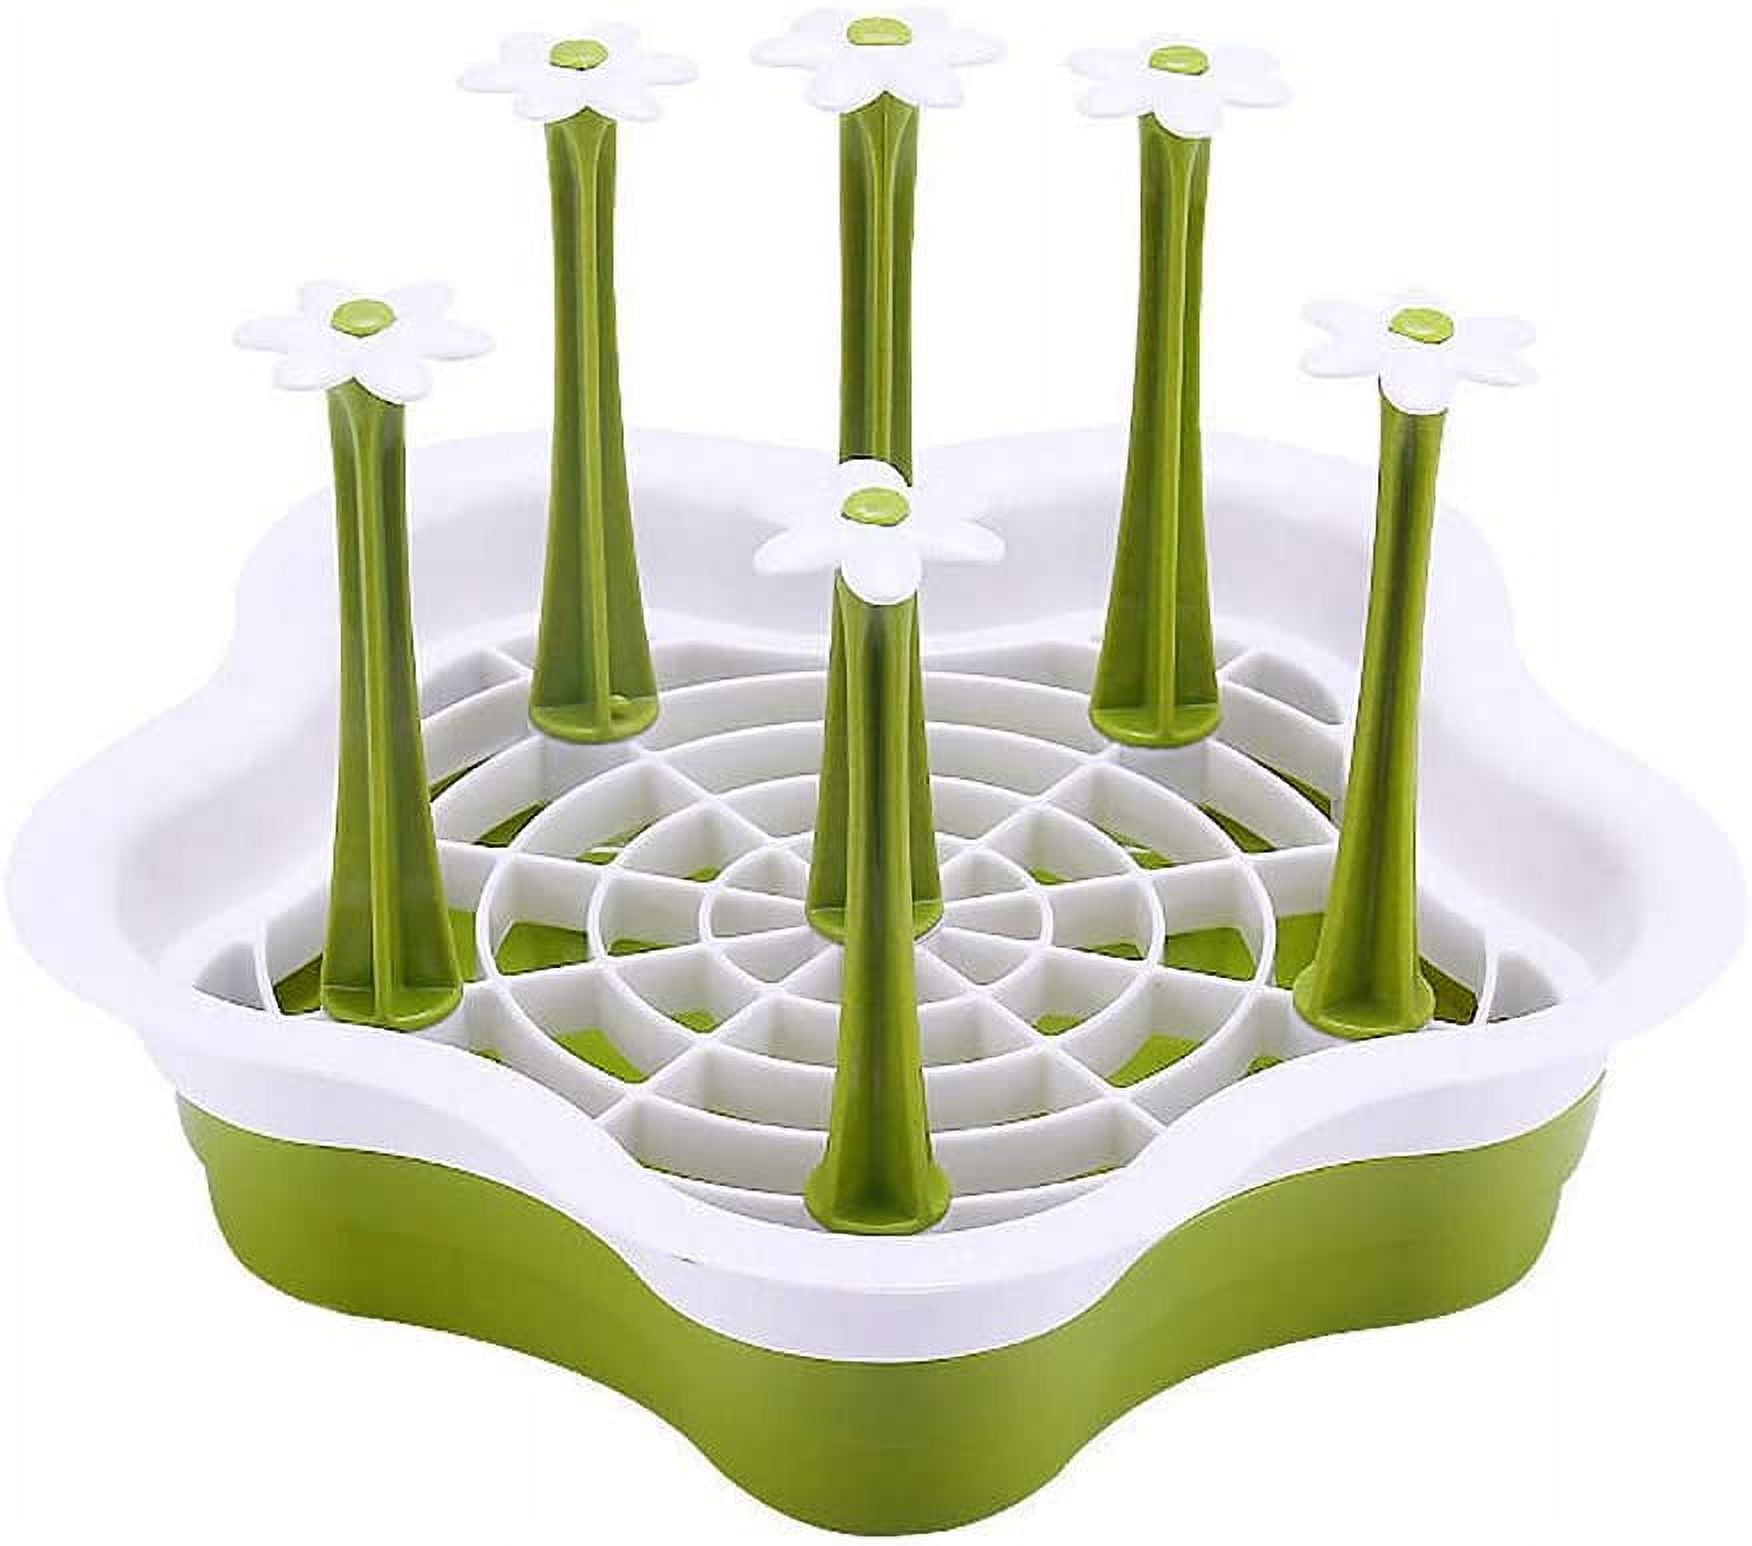 Limei 1Pcs Baby Bottle Drying Rack, Small Portable Bottle Dryer Holder for Nipples, Cups, Pump Parts and Accessories (Green)